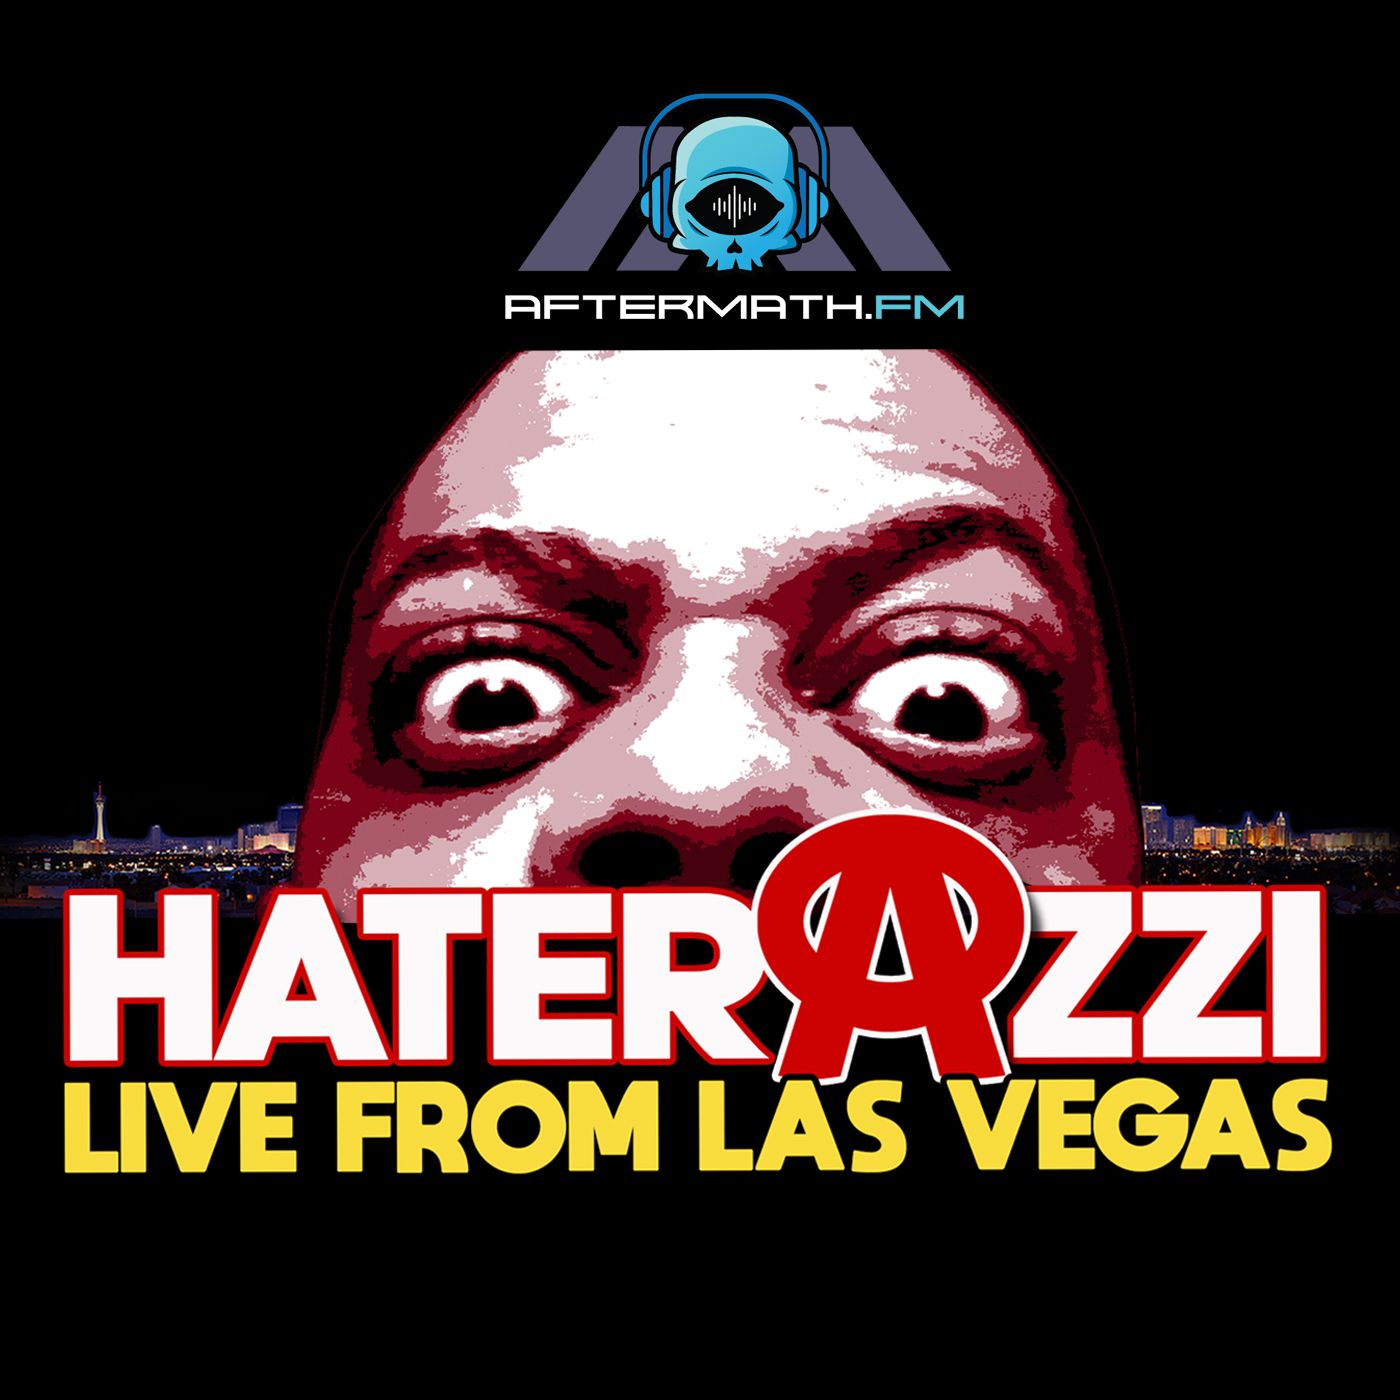 Haterazzi Live from Las Vegas